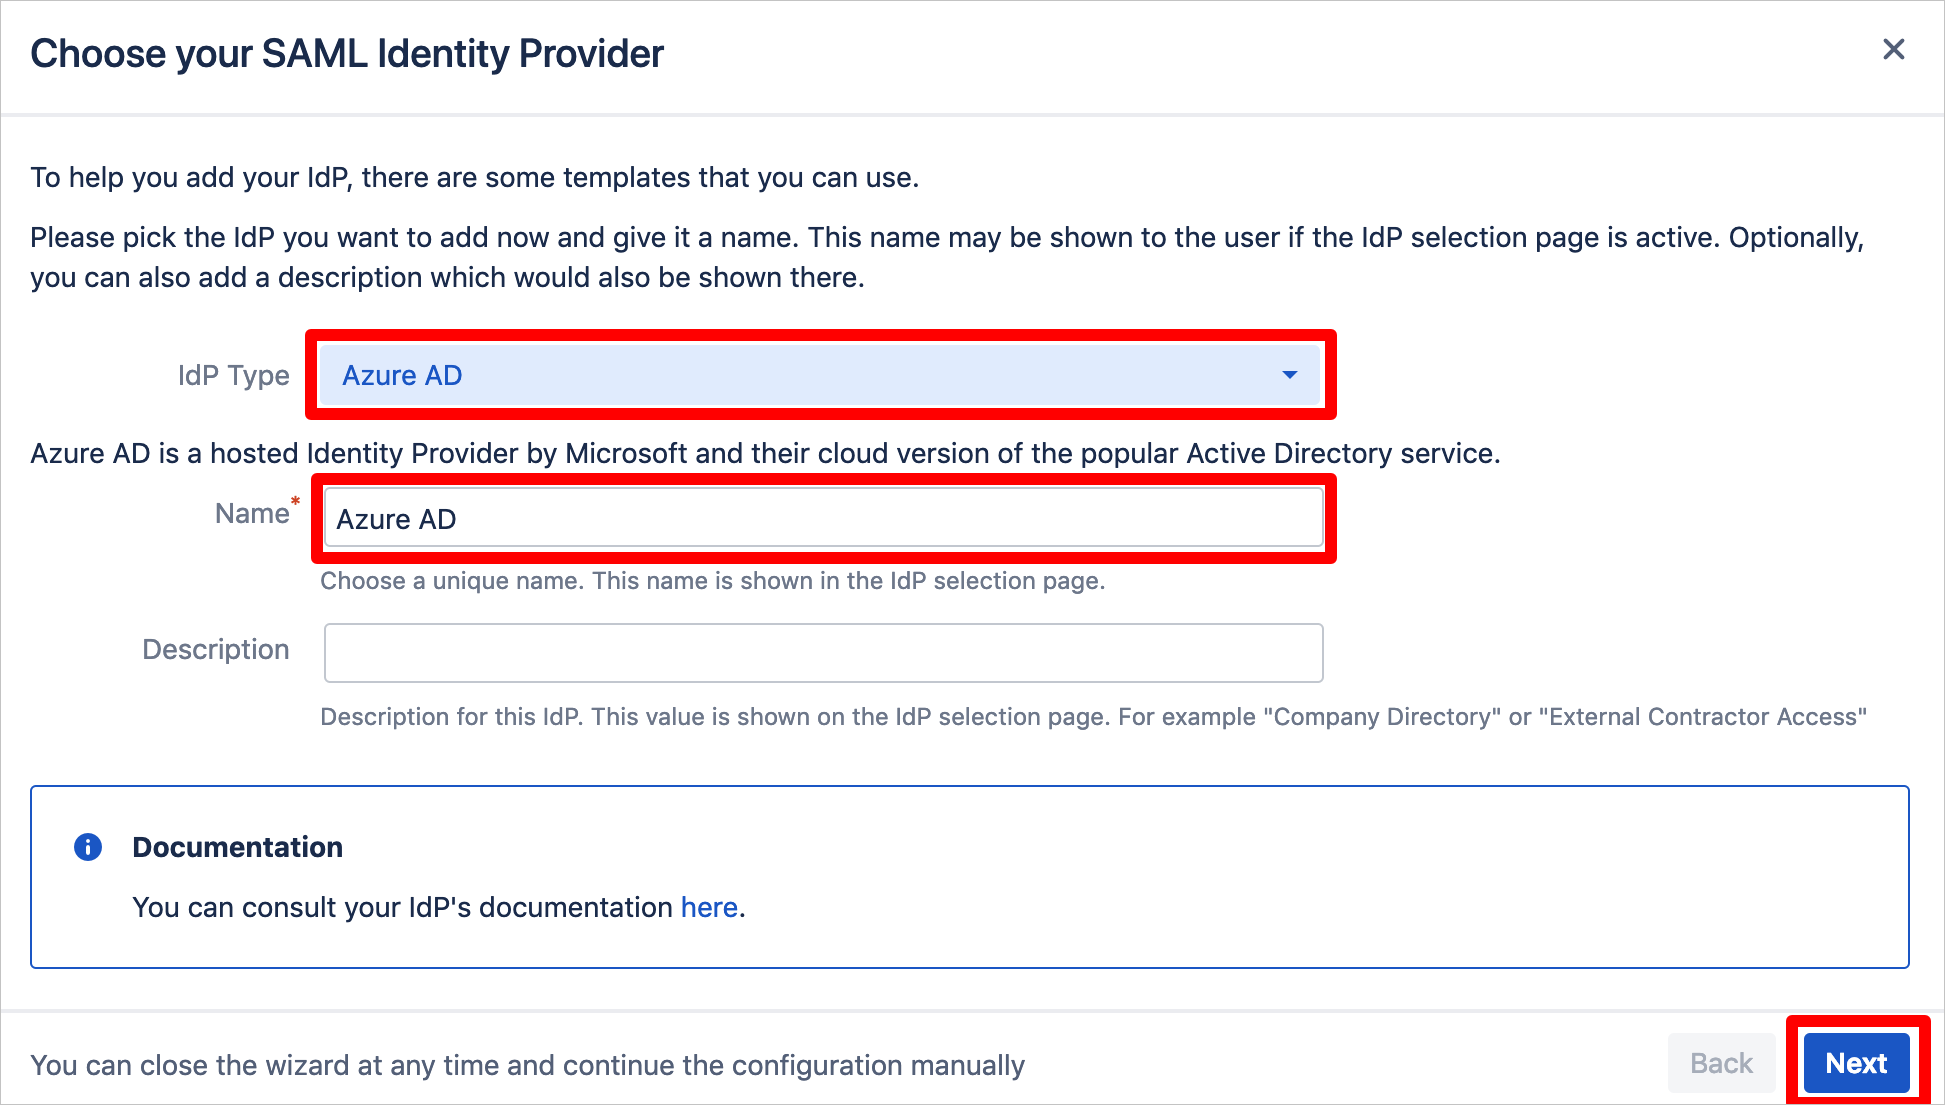 Screenshot that shows the "Choose your S A M L Identity Provider" page with the "I d P Type" and "Name" text boxes highlighted, and the "Next" button selected.